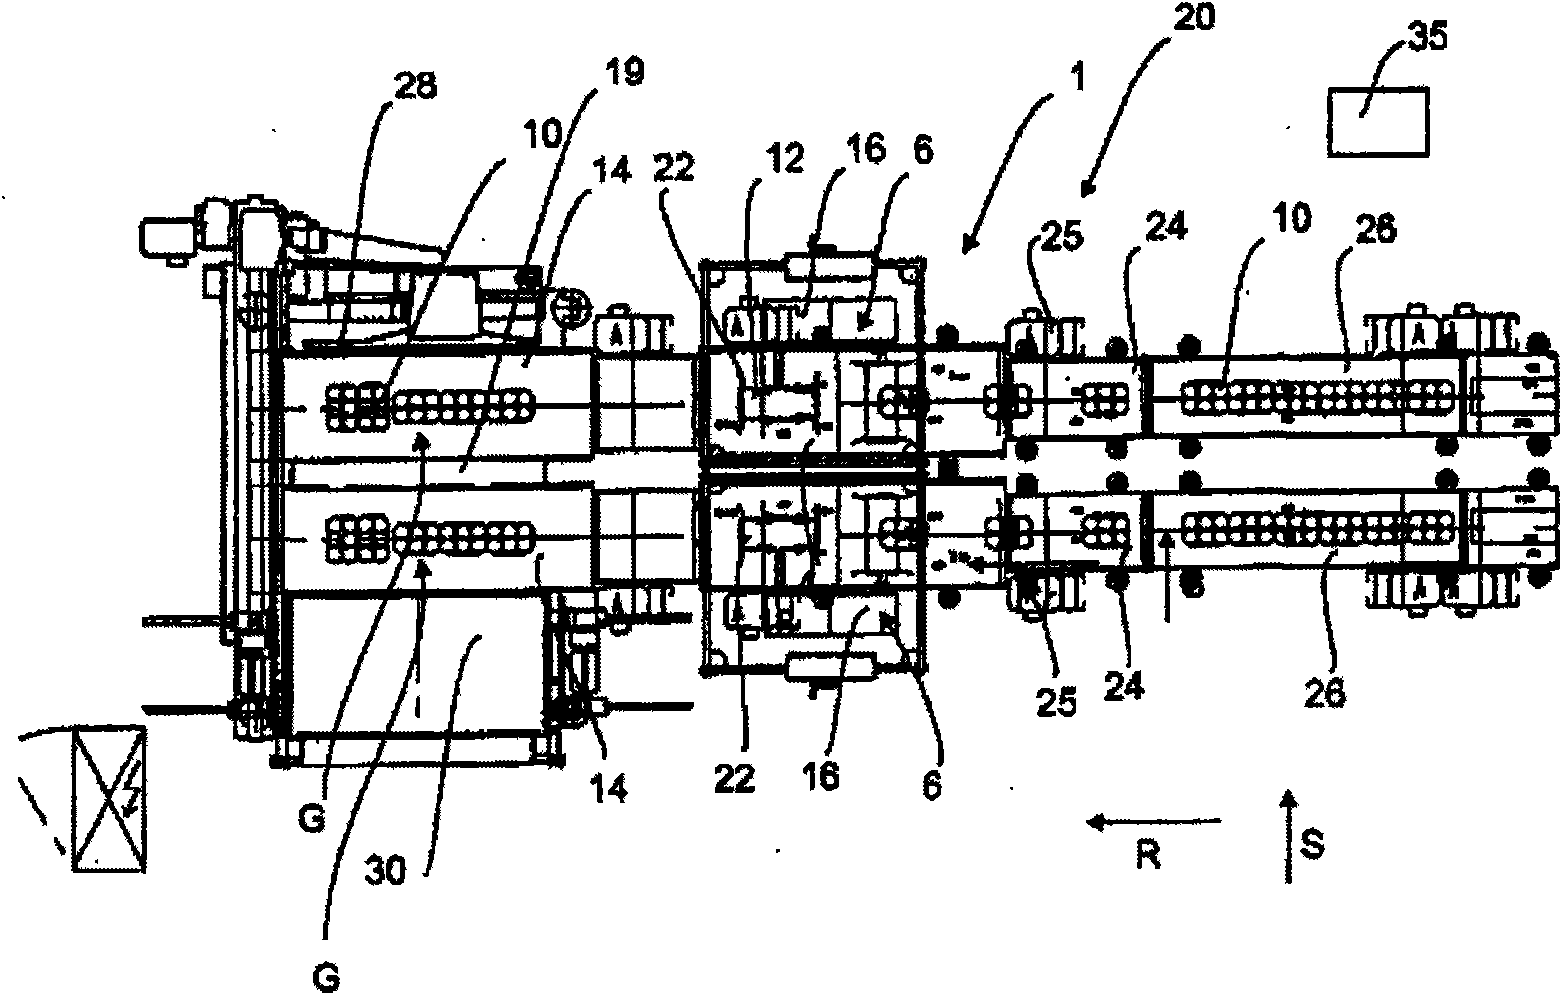 Apparatus for conveying packages